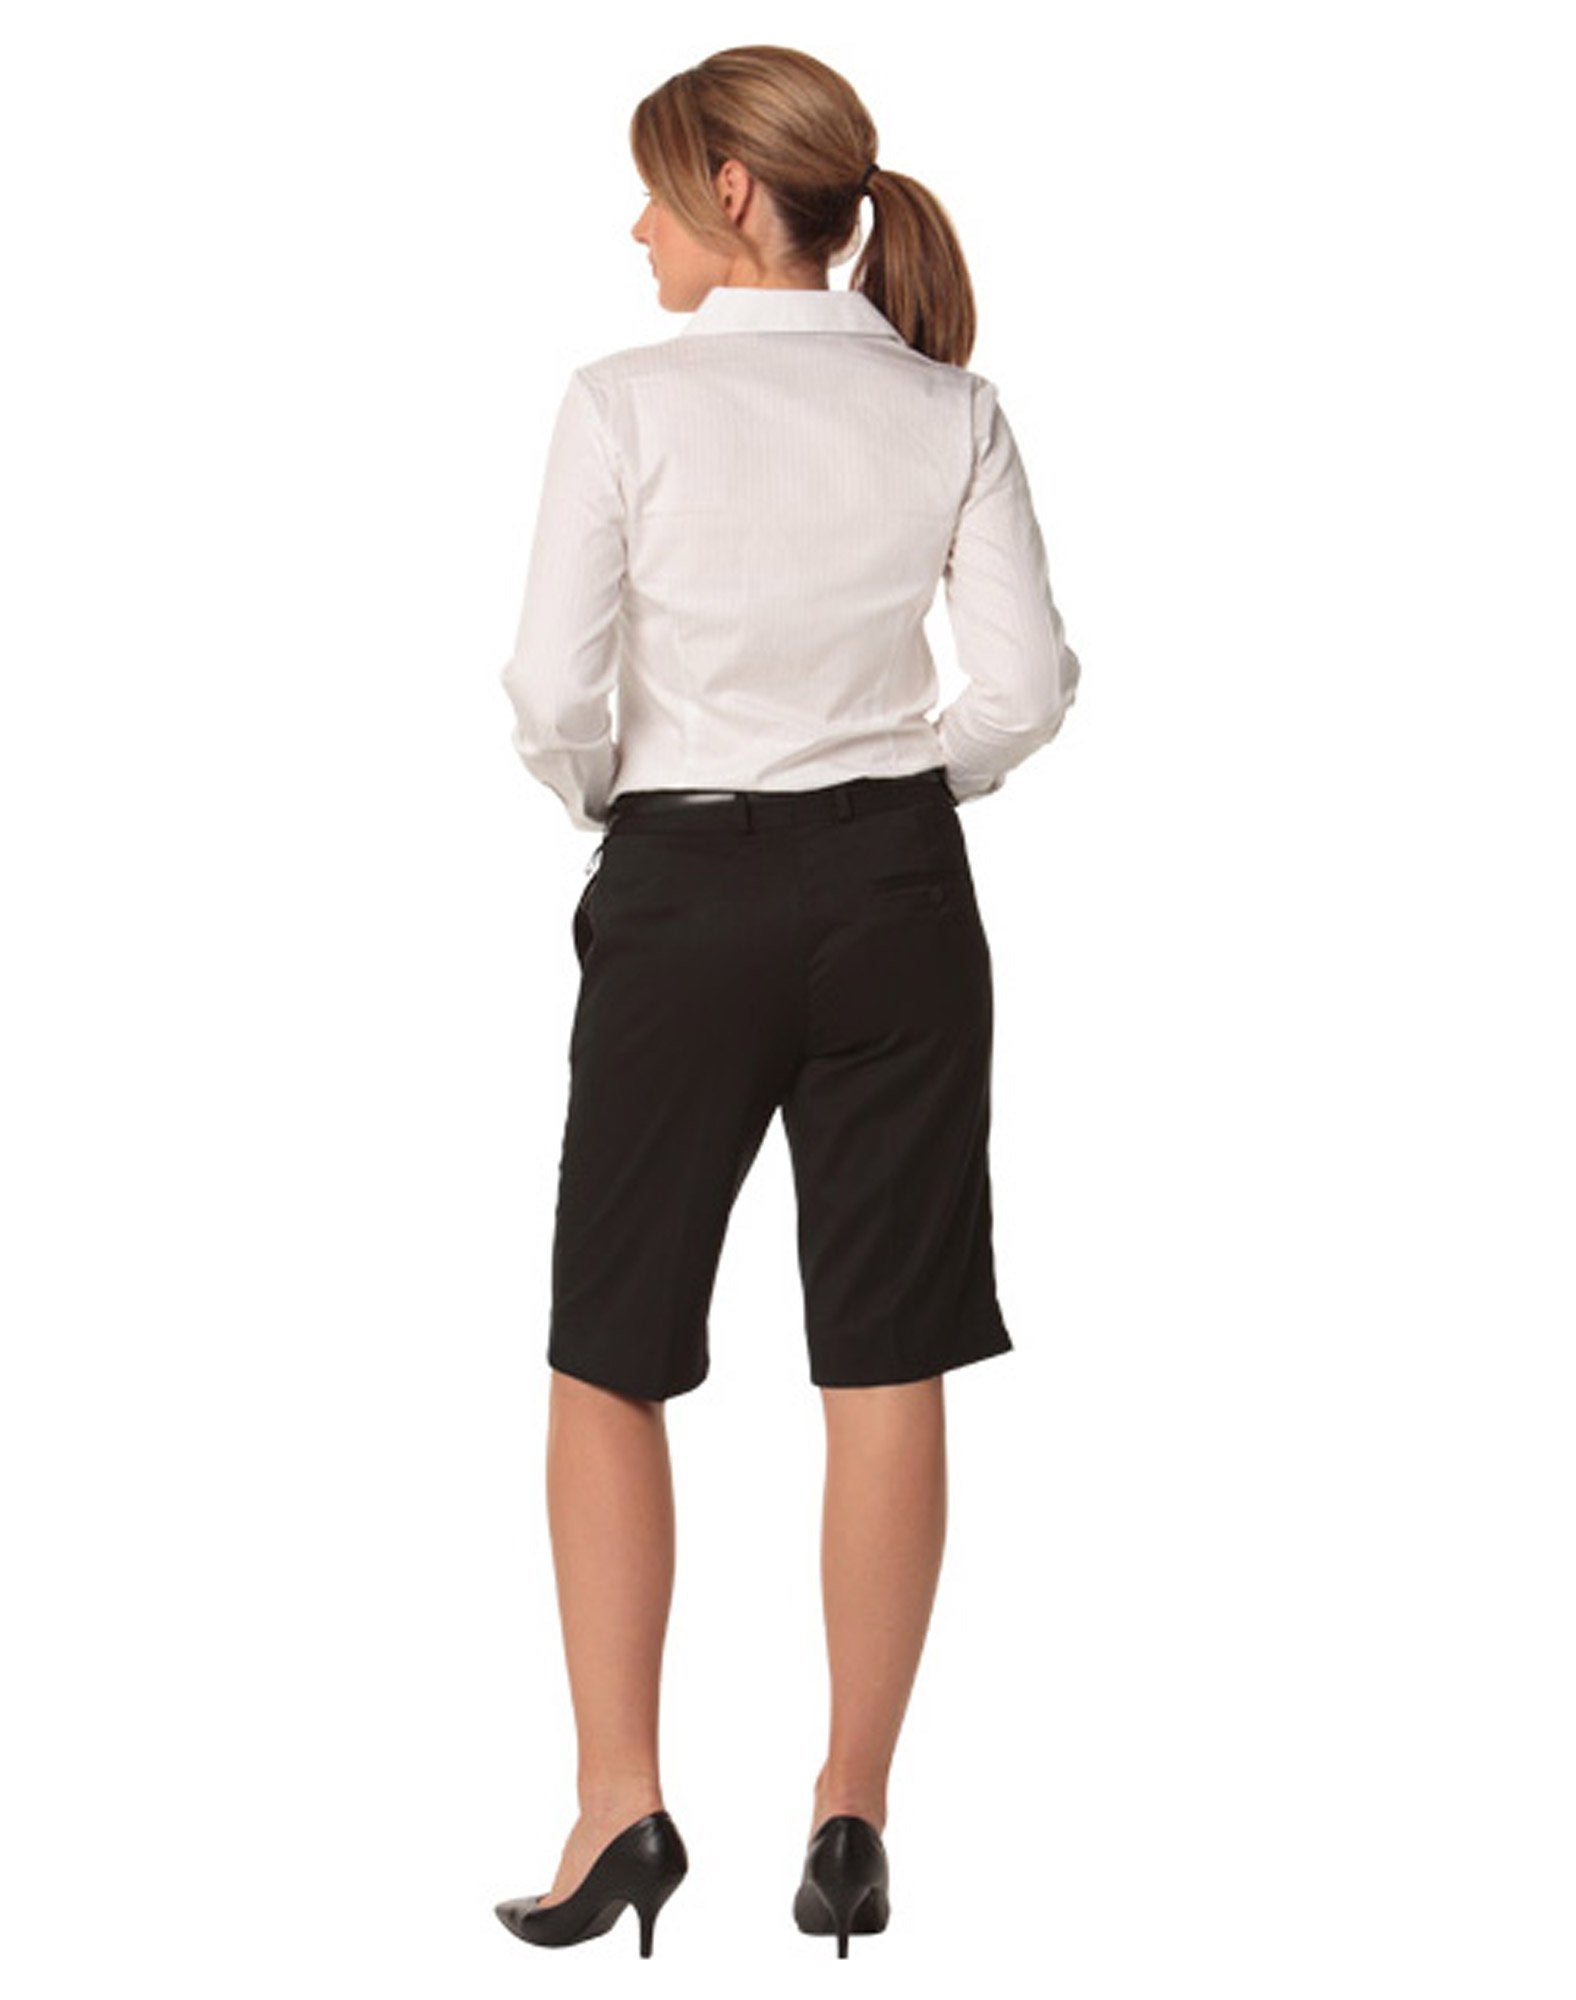 Benchmark M9441 Ladies Knee Length Flexi Waist Shorts In Poly/viscose Stretch